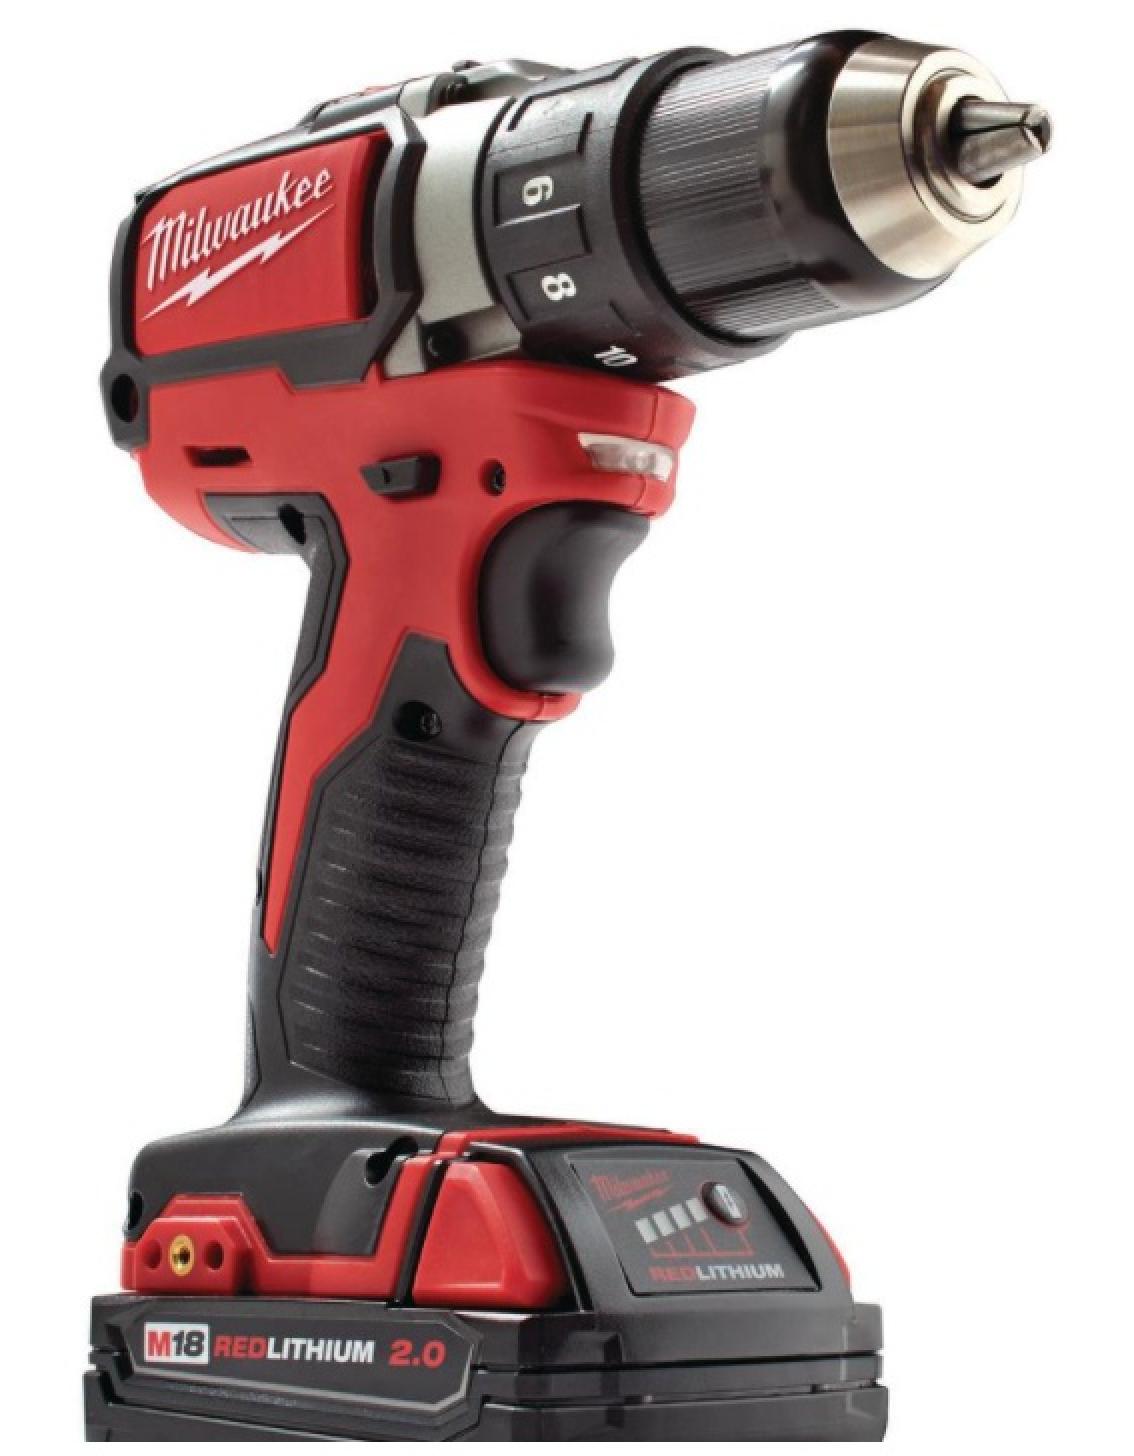 Milwaukee M18 Compact Brushless 1/2" Drill/Driver Kit Right Side Angle